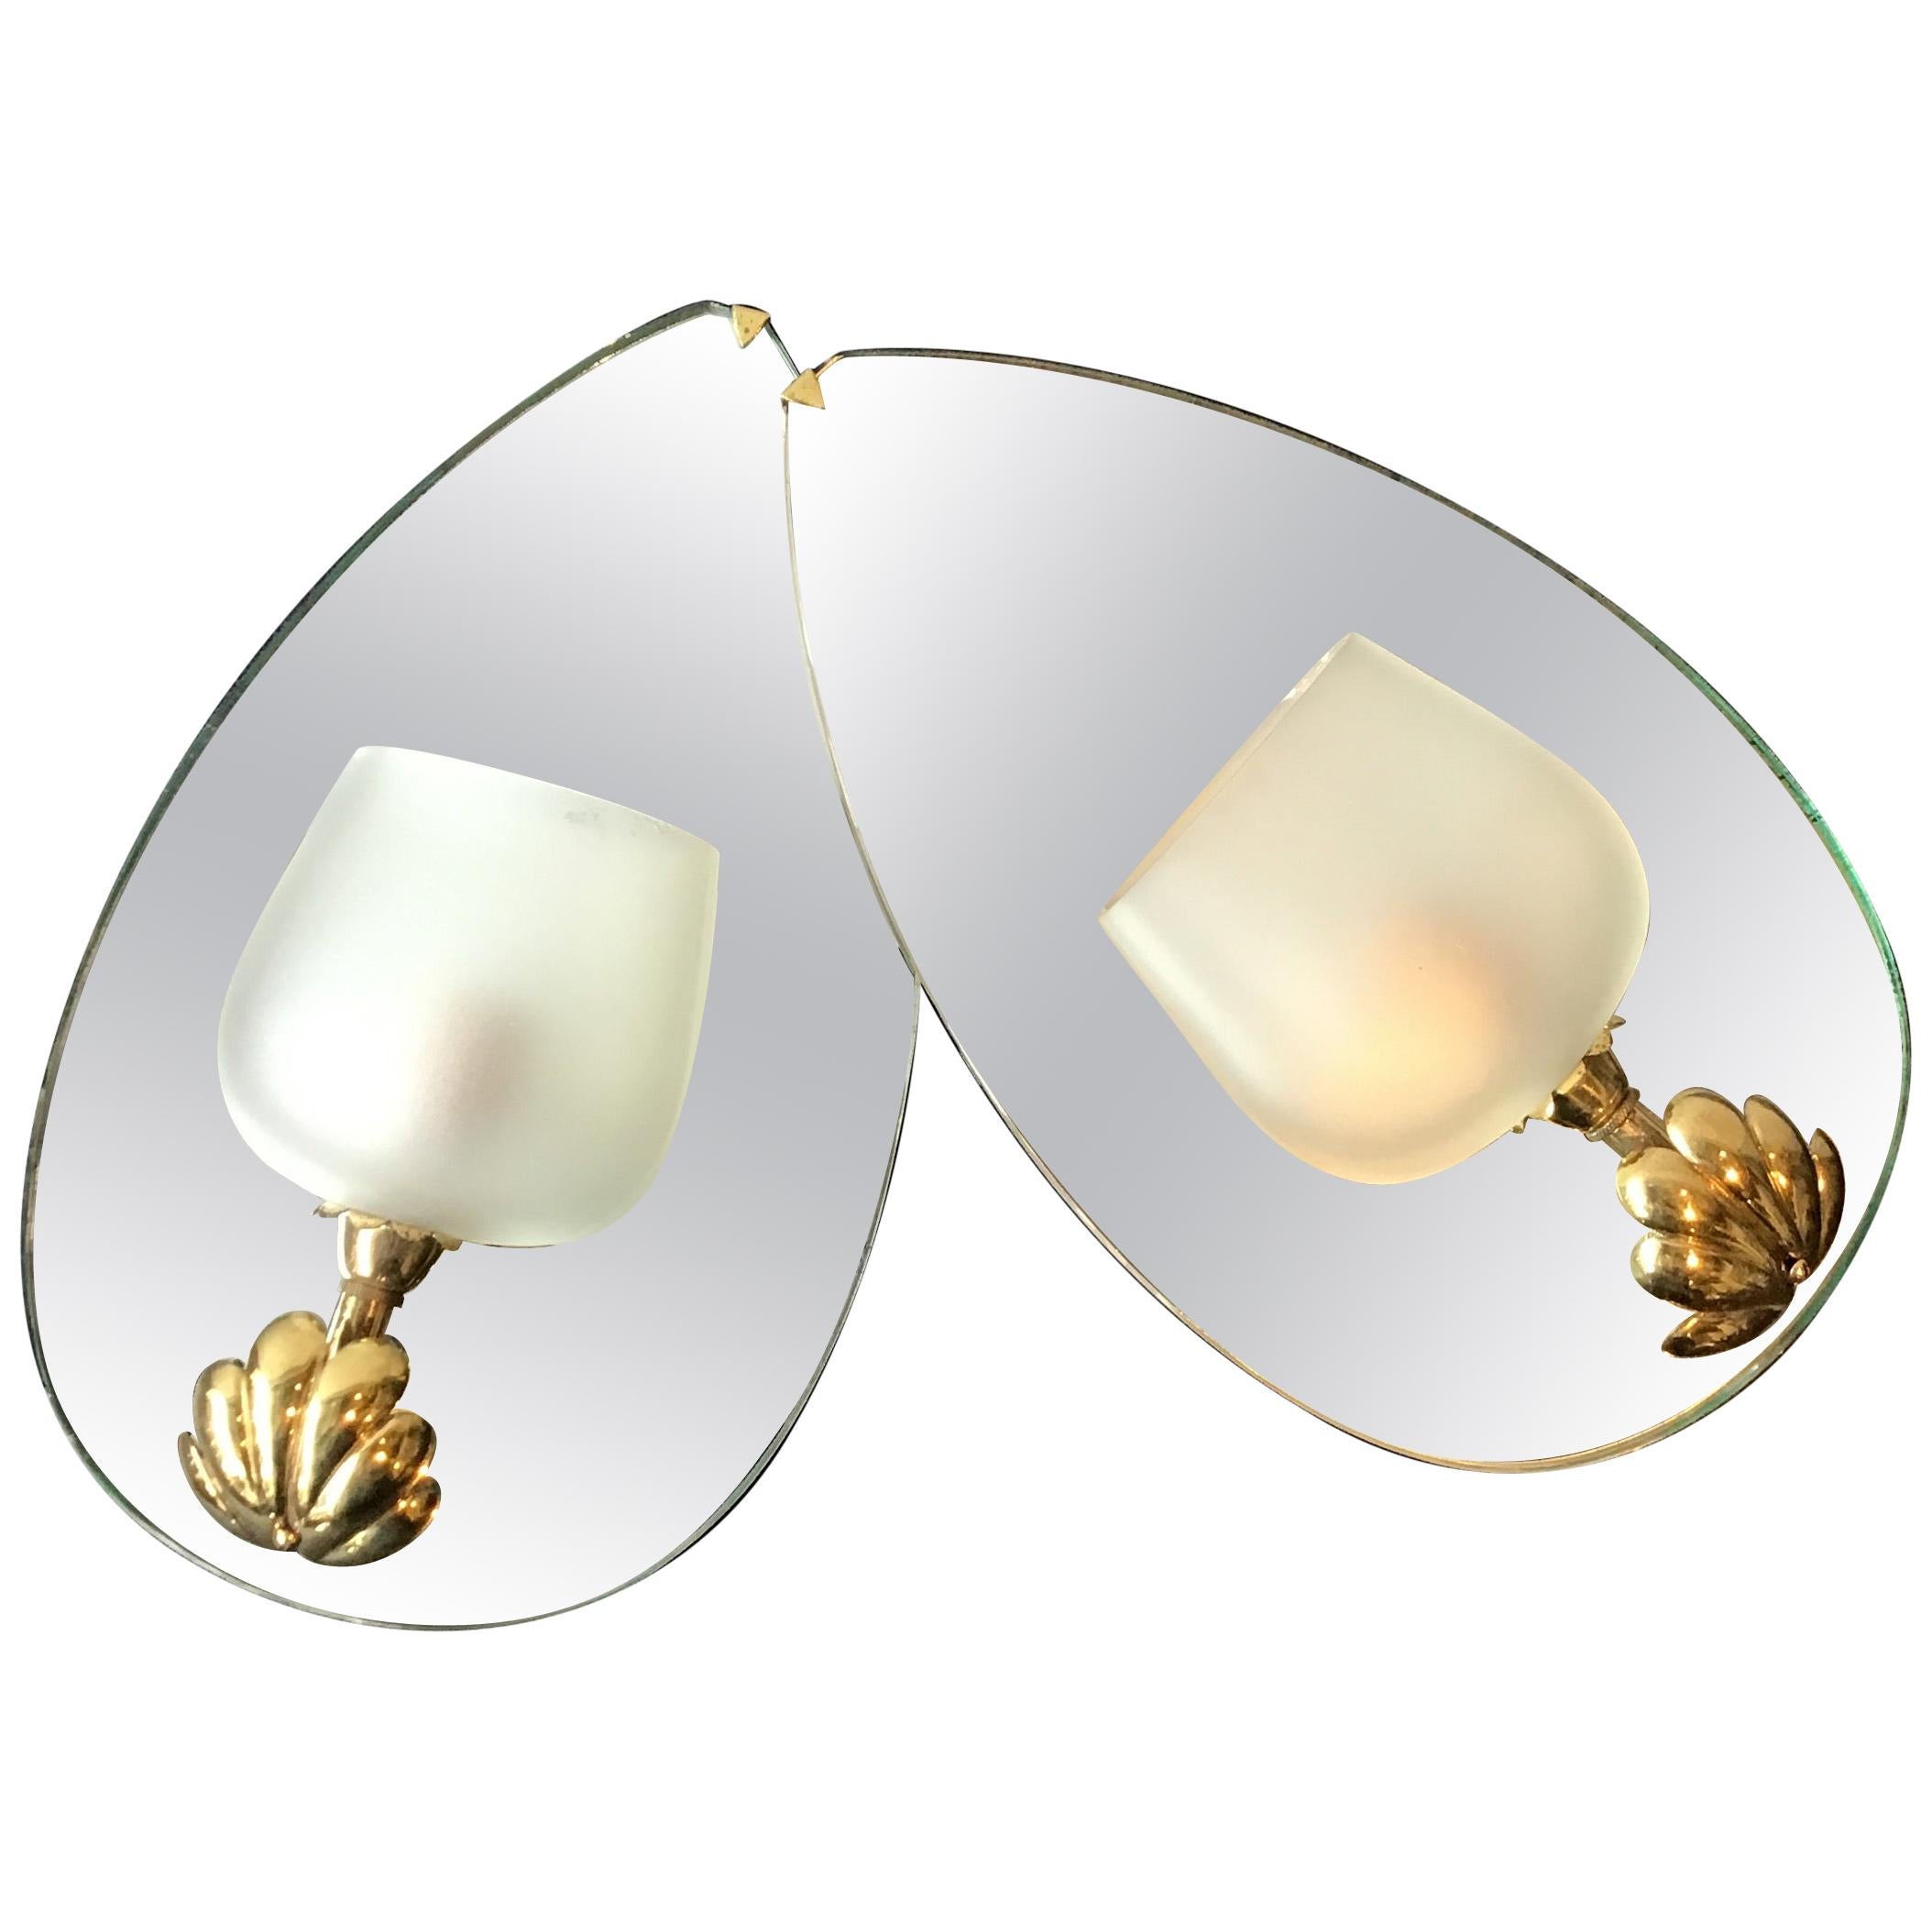 Pair of 1940s French Mirrored Back Sconces